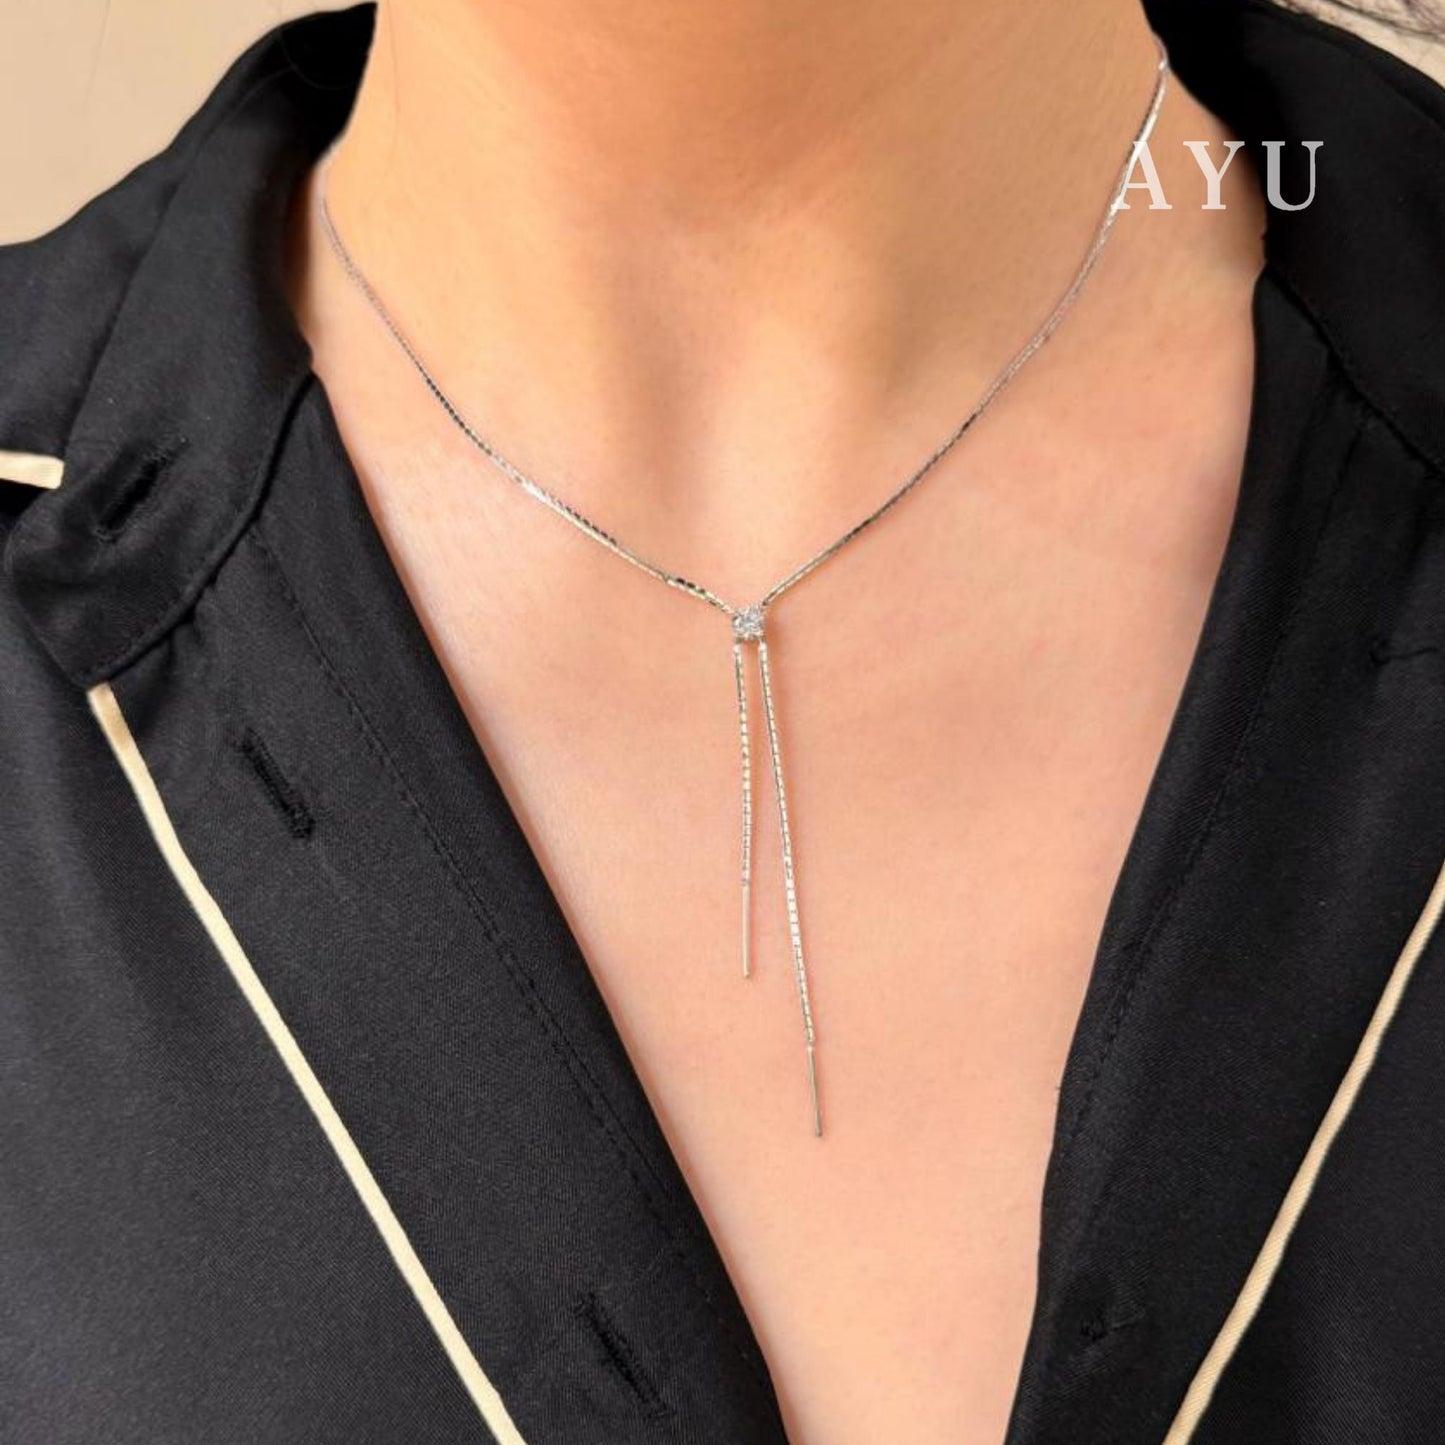 AYU Kalung Emas-Solitaire Box Chain Lariat Necklace 17k White Gold